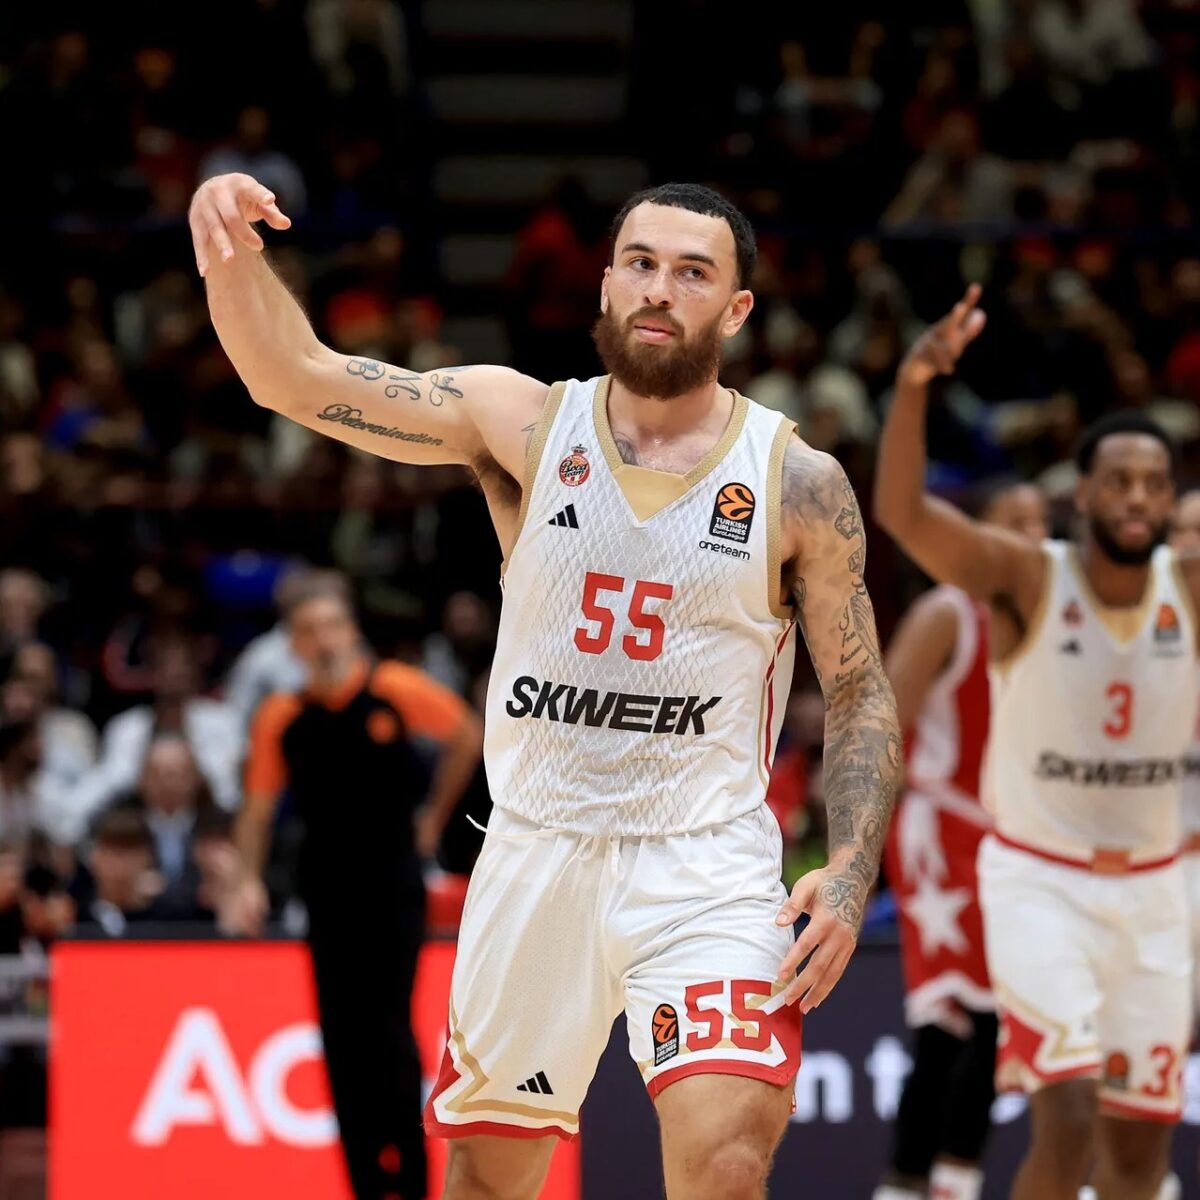 Mike James knows this basketball season with AS Monaco gives him a real shot at winning Euroleague MVP